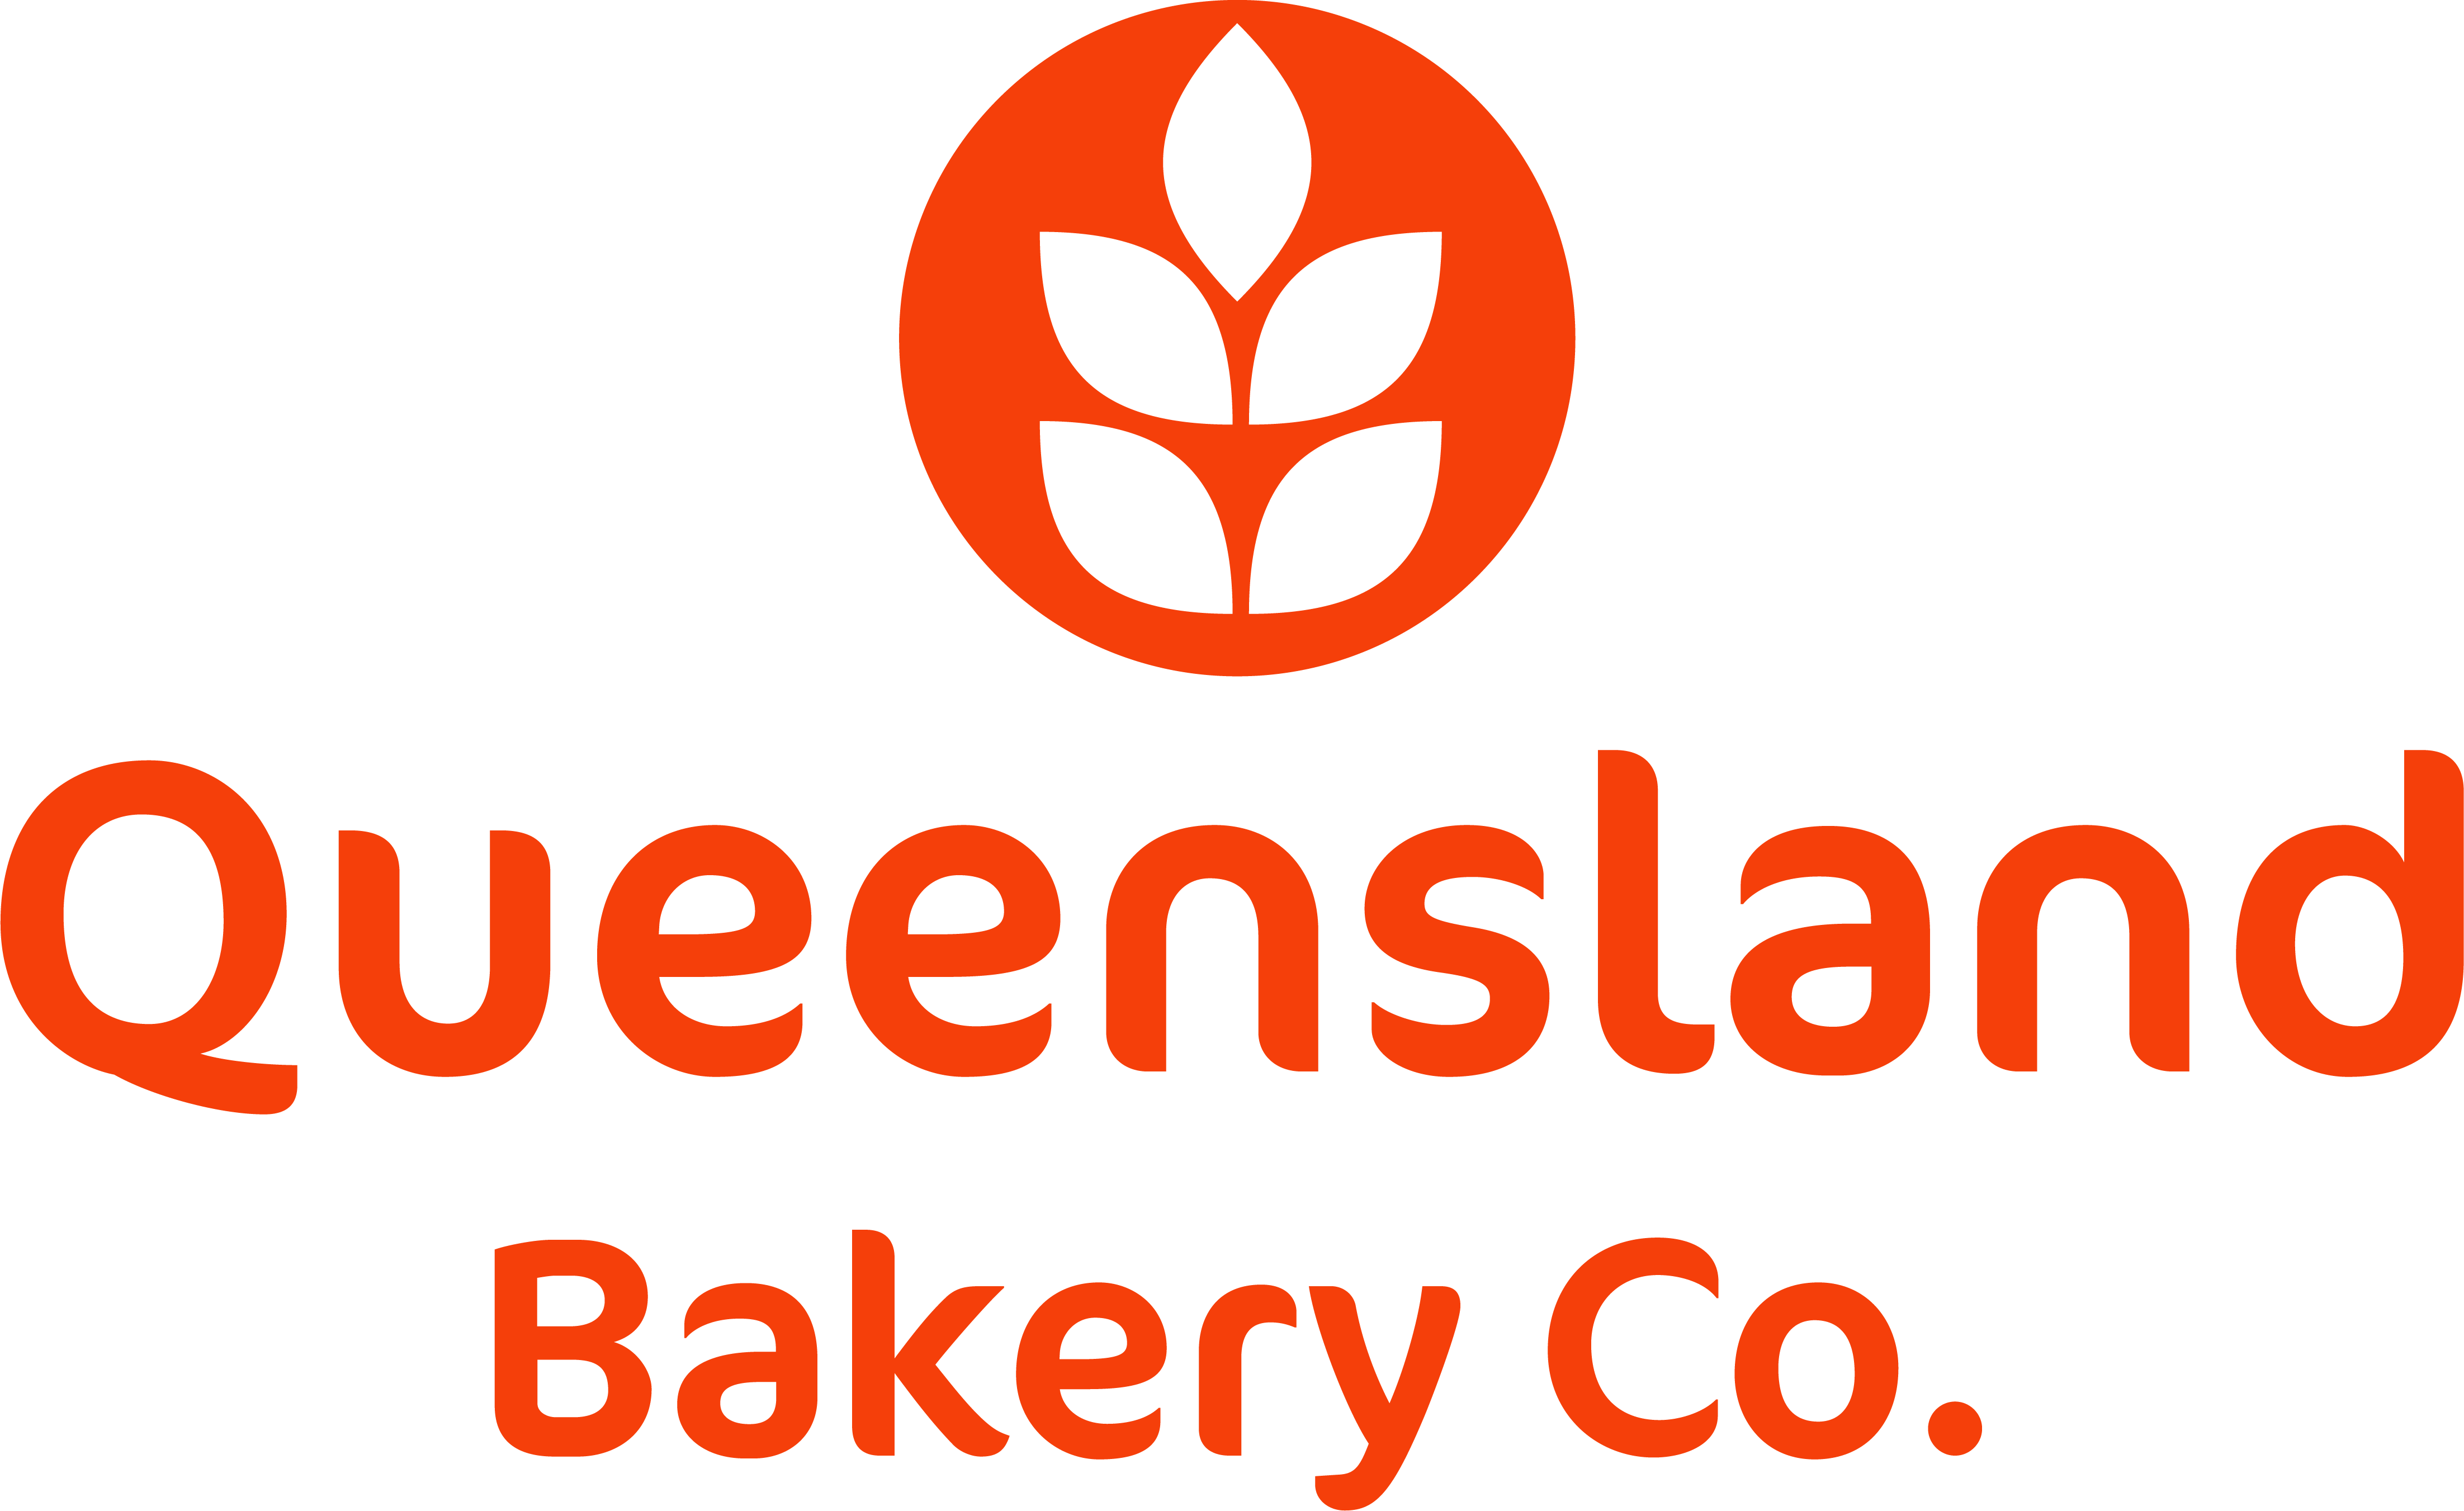 Fulfil Limited t/a Queensland Bakery image.